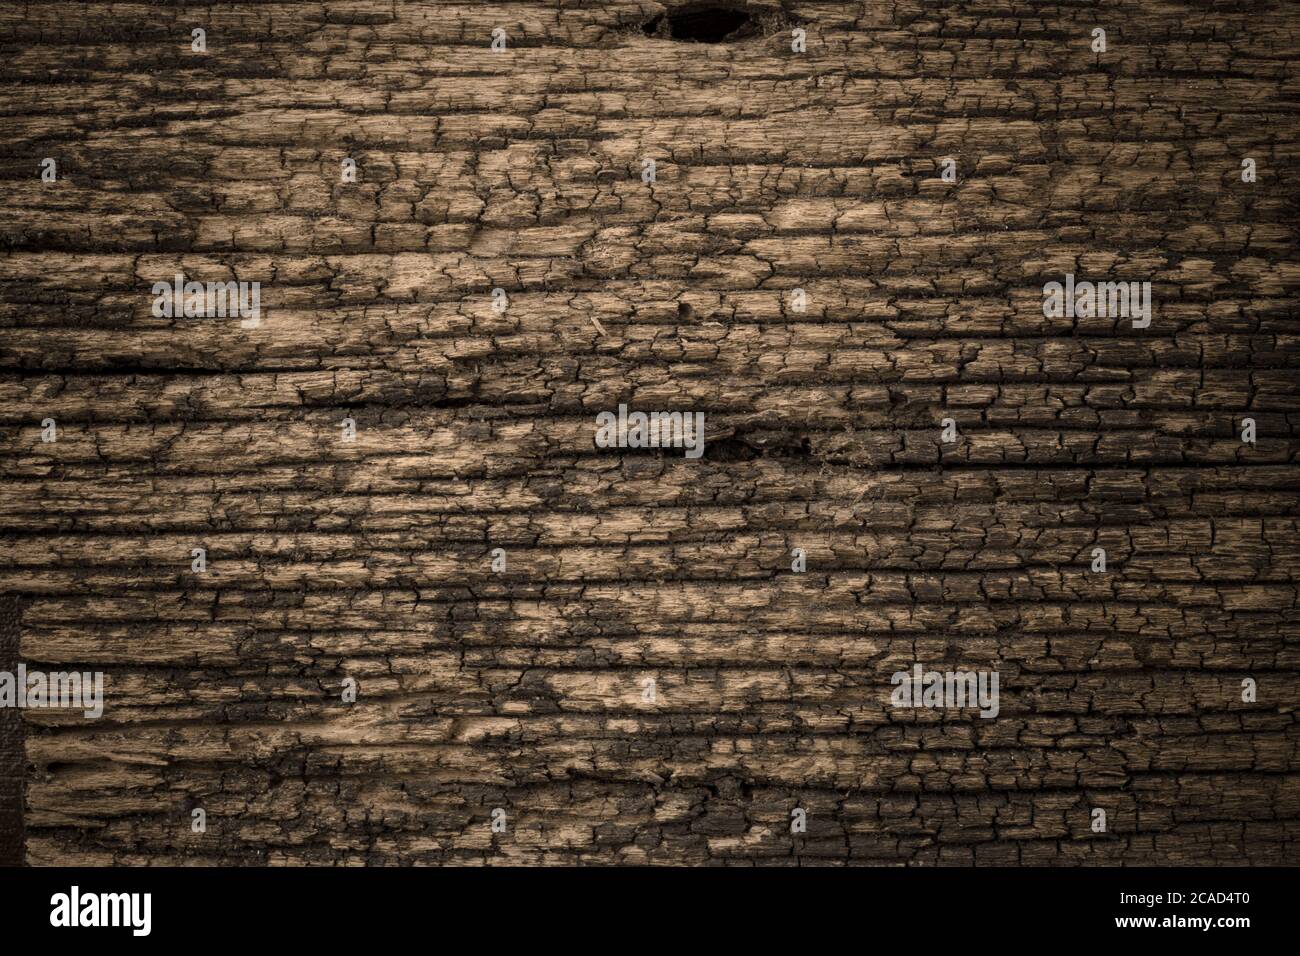 heavy shabby wooden background texture surface. Stock Photo